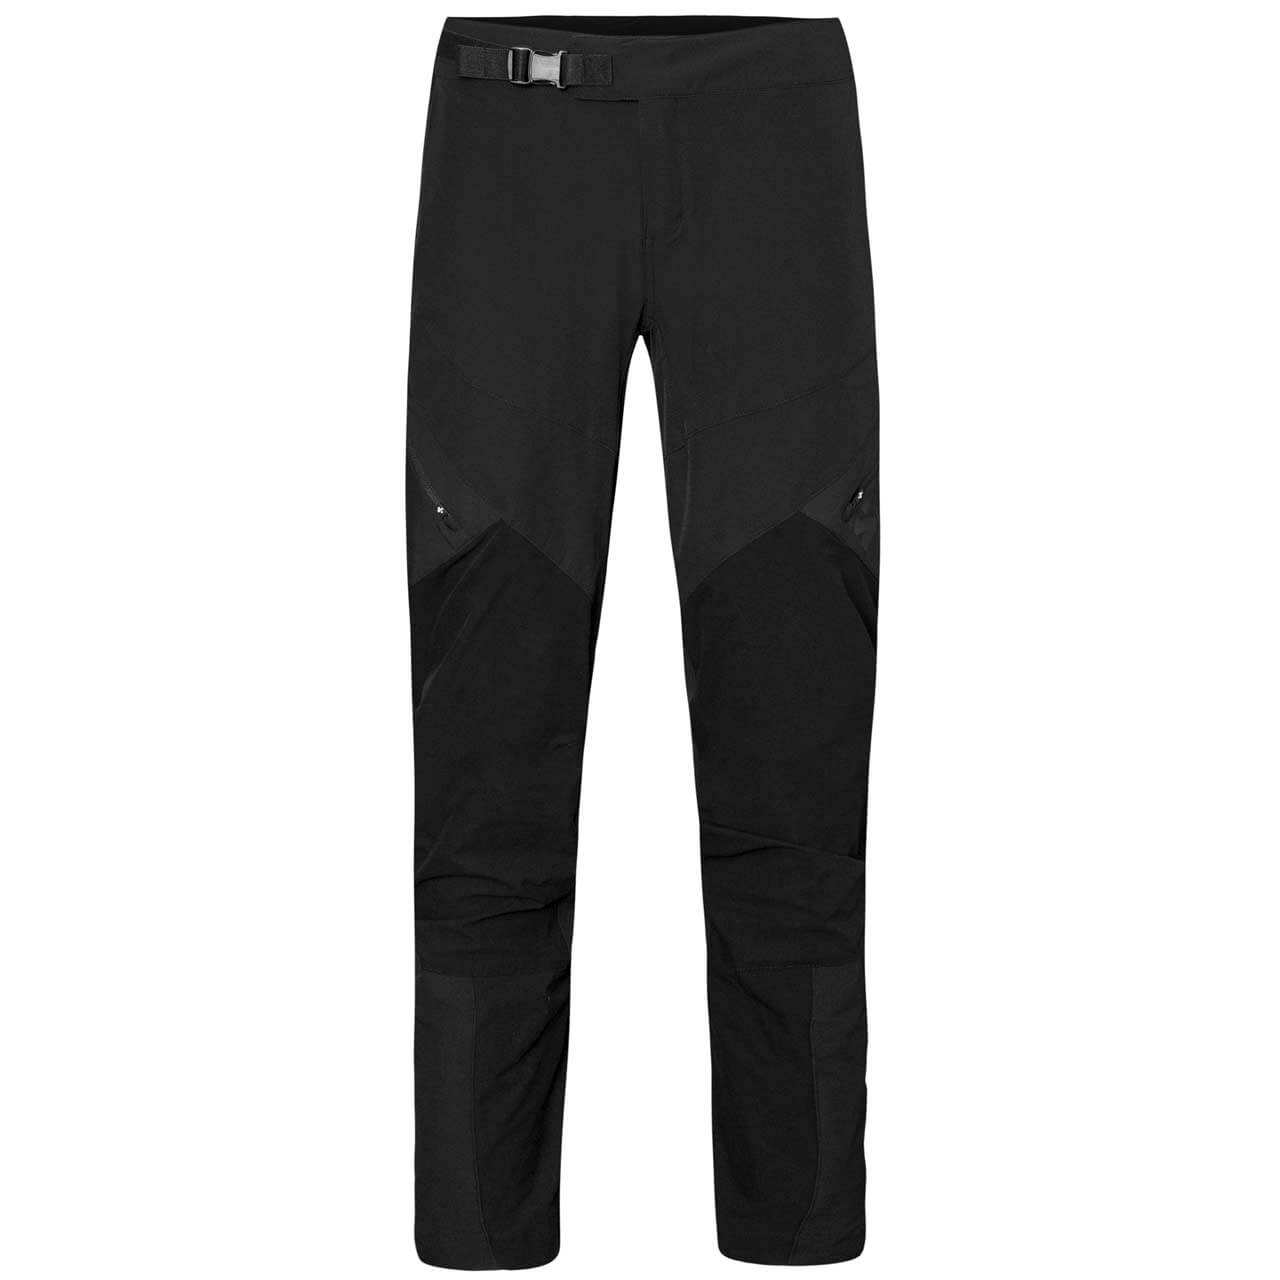 Sweet Protection Hunter Pants - Black, M von Sweet Protection}